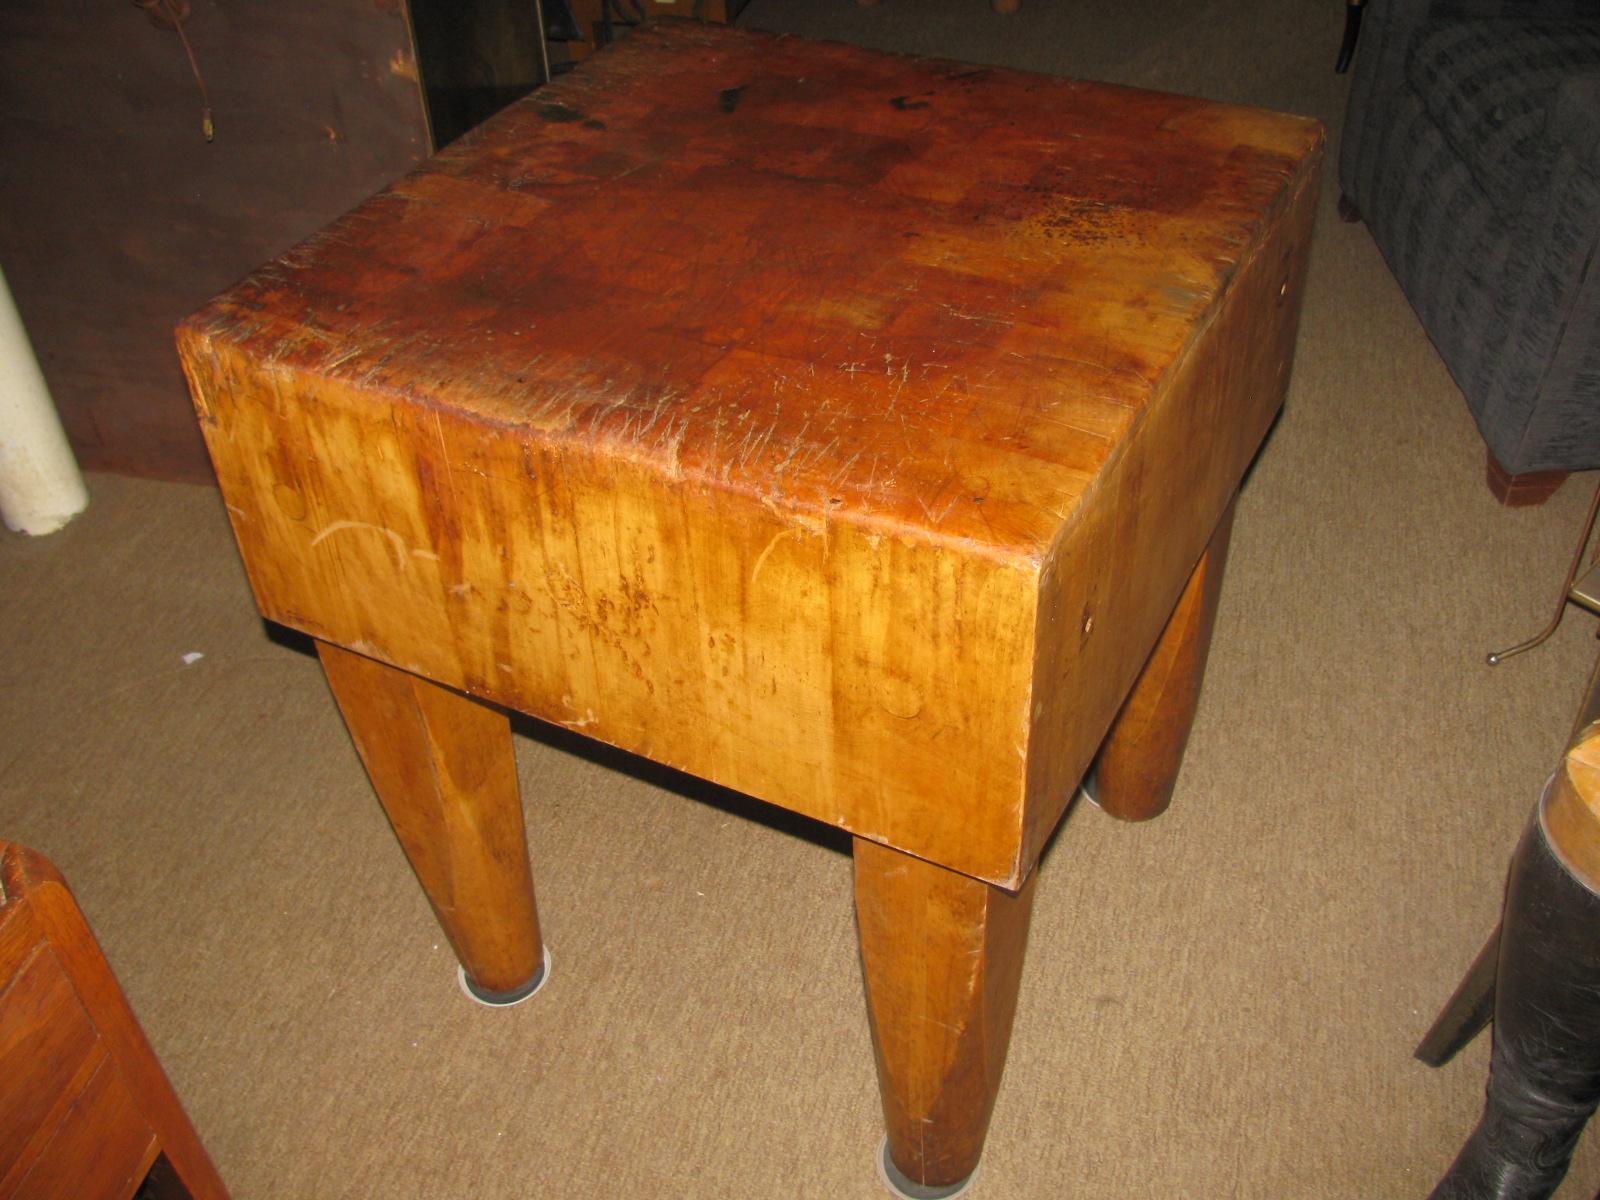 Large maple block with thick heavy legs for support. Has the appropriate wear from years of use.
Very heavy yet very sturdy. Wheels have been added with locks and they work fantastic. Top has been lightly sanded and bleached. Linseed oil applied.